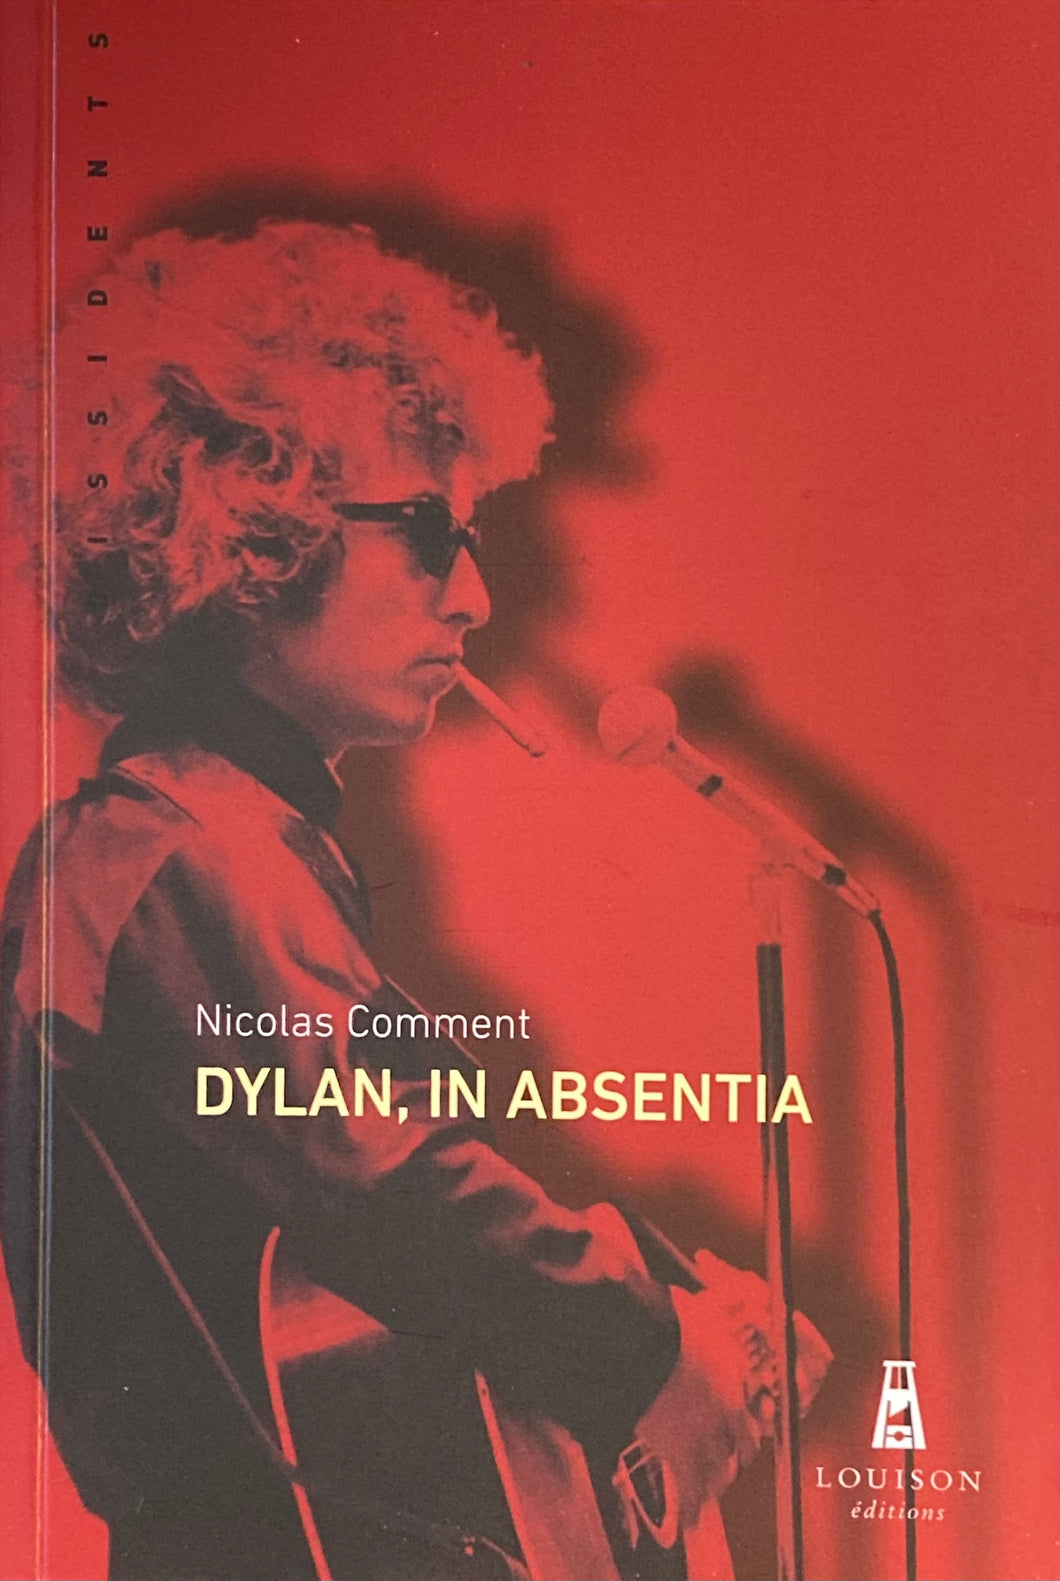 DYLAN, IN ABSENTIA